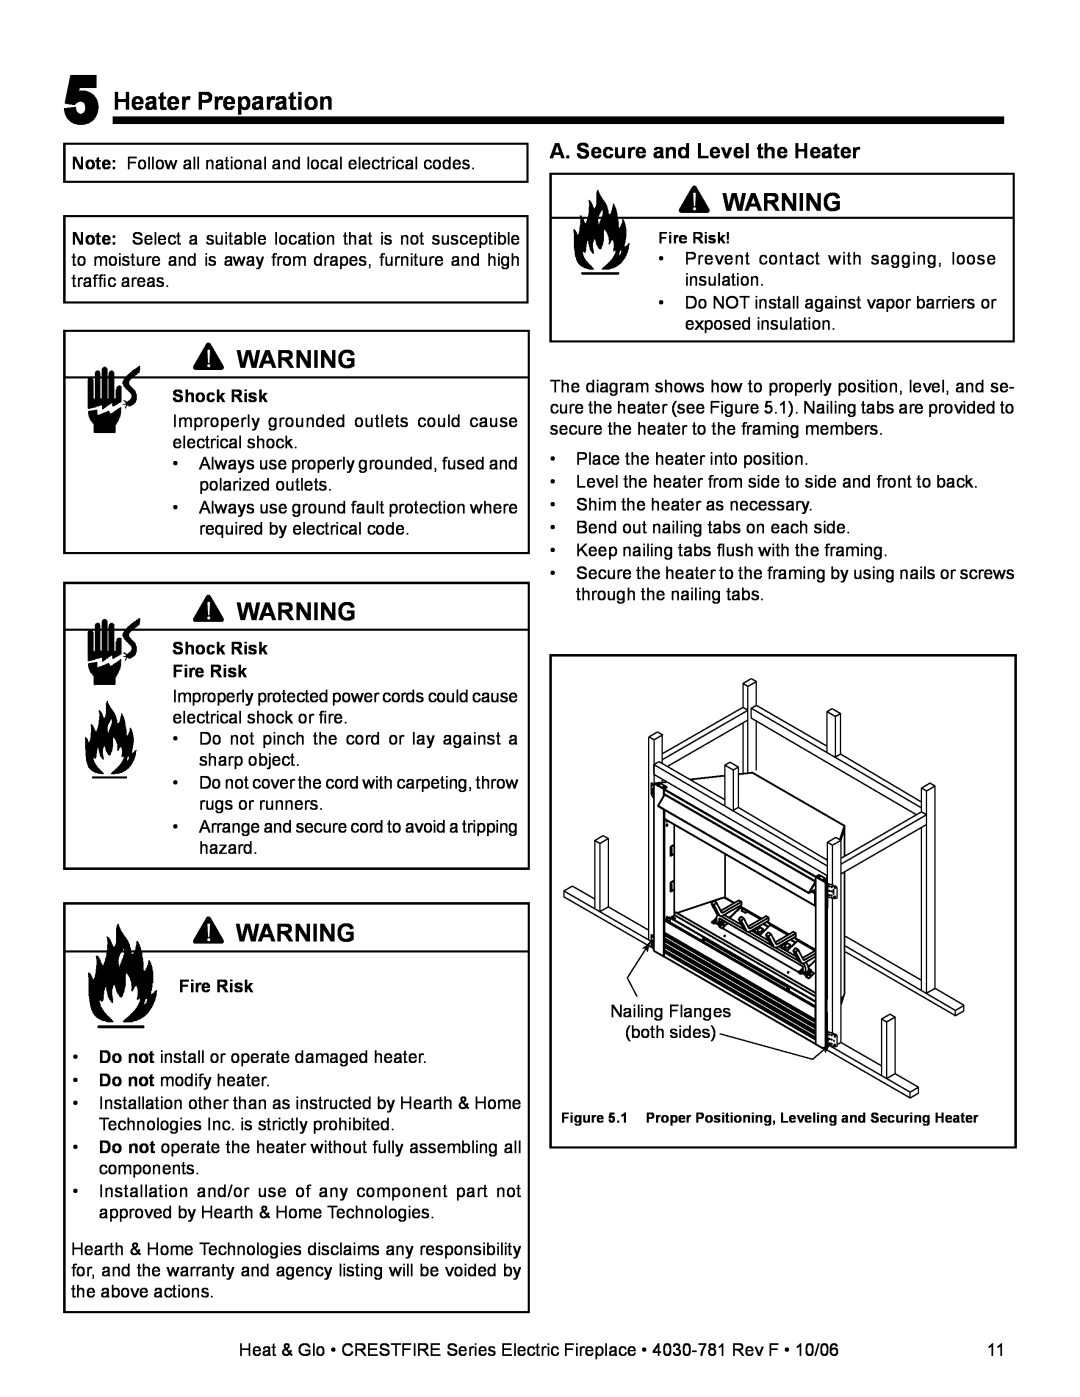 Heat & Glo LifeStyle CF550E-B owner manual Heater Preparation, A. Secure and Level the Heater 